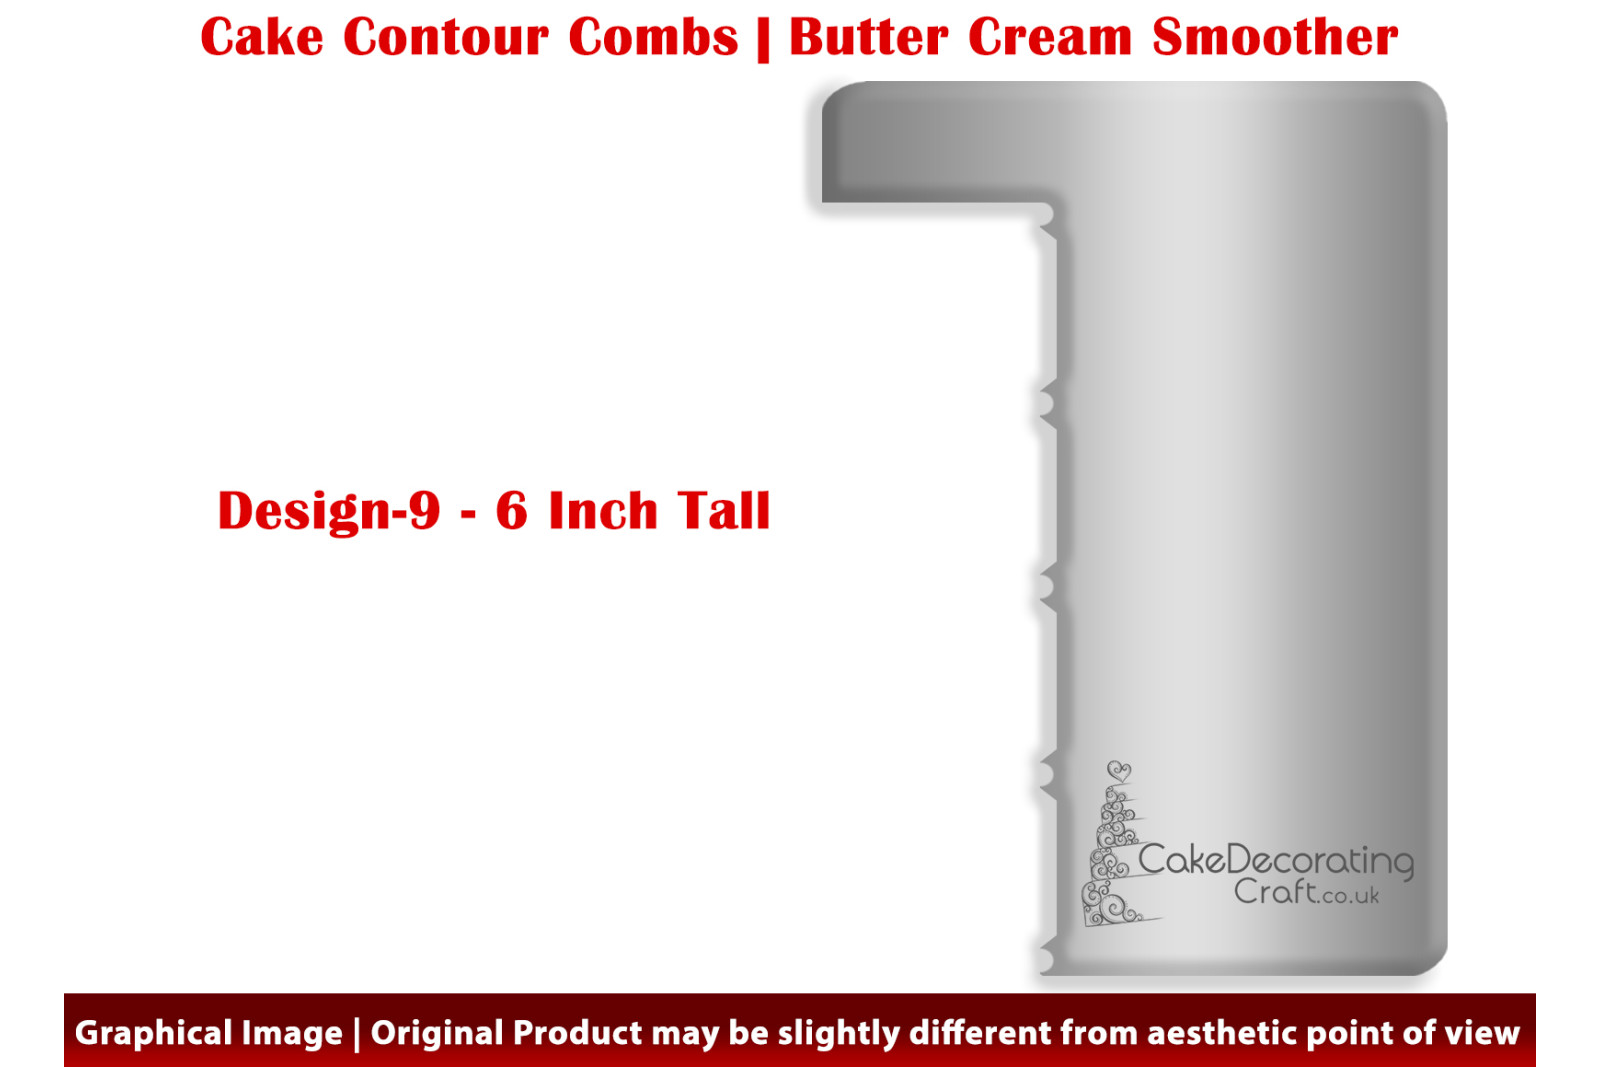 Fabulous Facets Design 2 | 6 Inch | Cake Decorating Craft | Cake Contour Combs | Smoothing | Metal Spreader | Butter Cream Smoothing | Genius Tool